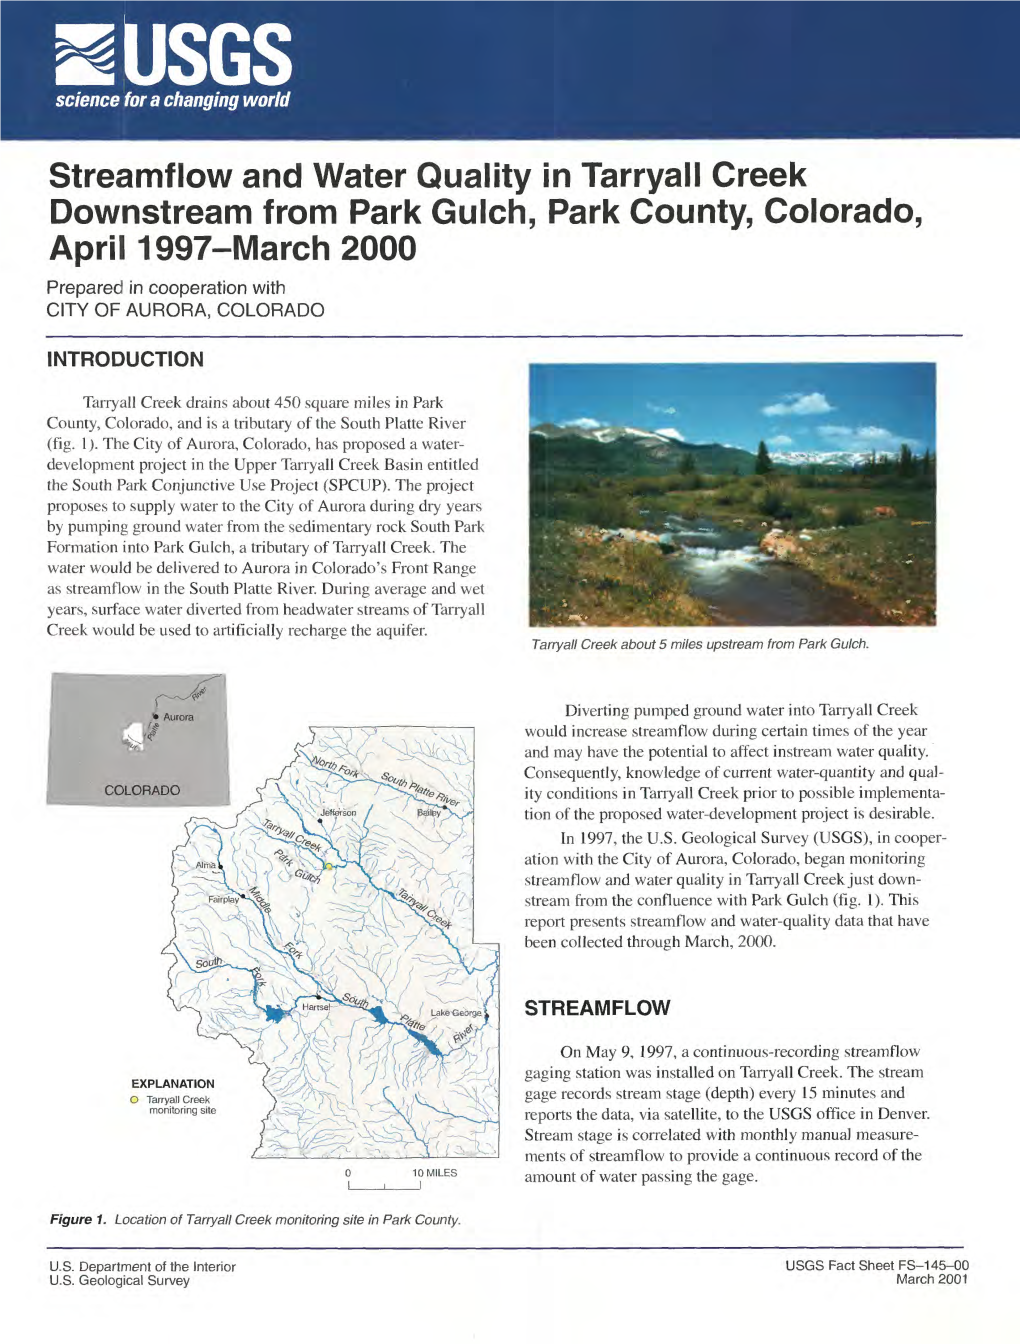 Streamflow and Water Quality in Tarryall Creek Downstream From